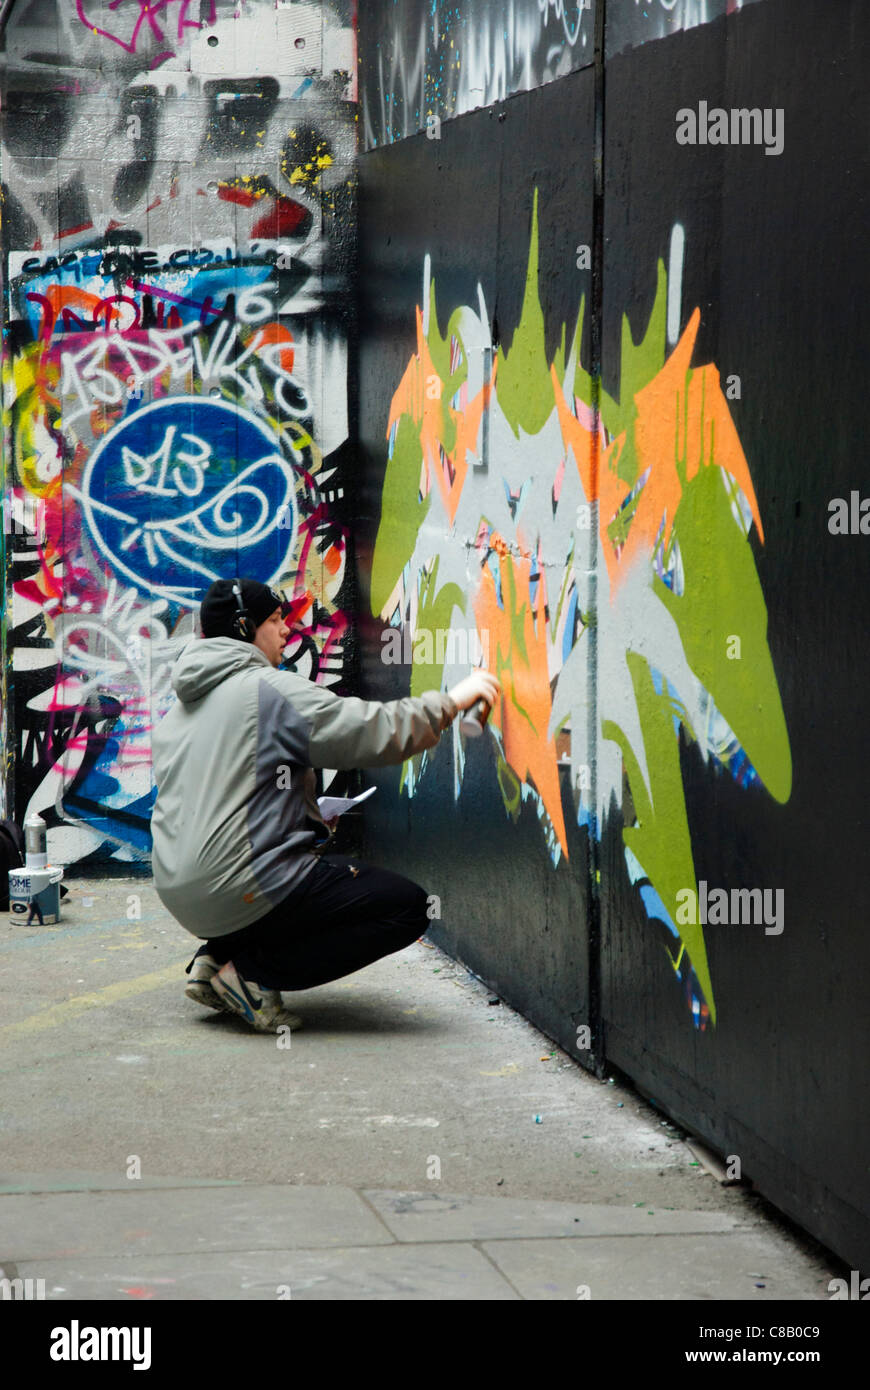 Graffitti artist at work on South Bank, London wearing a pair of headphones Stock Photo